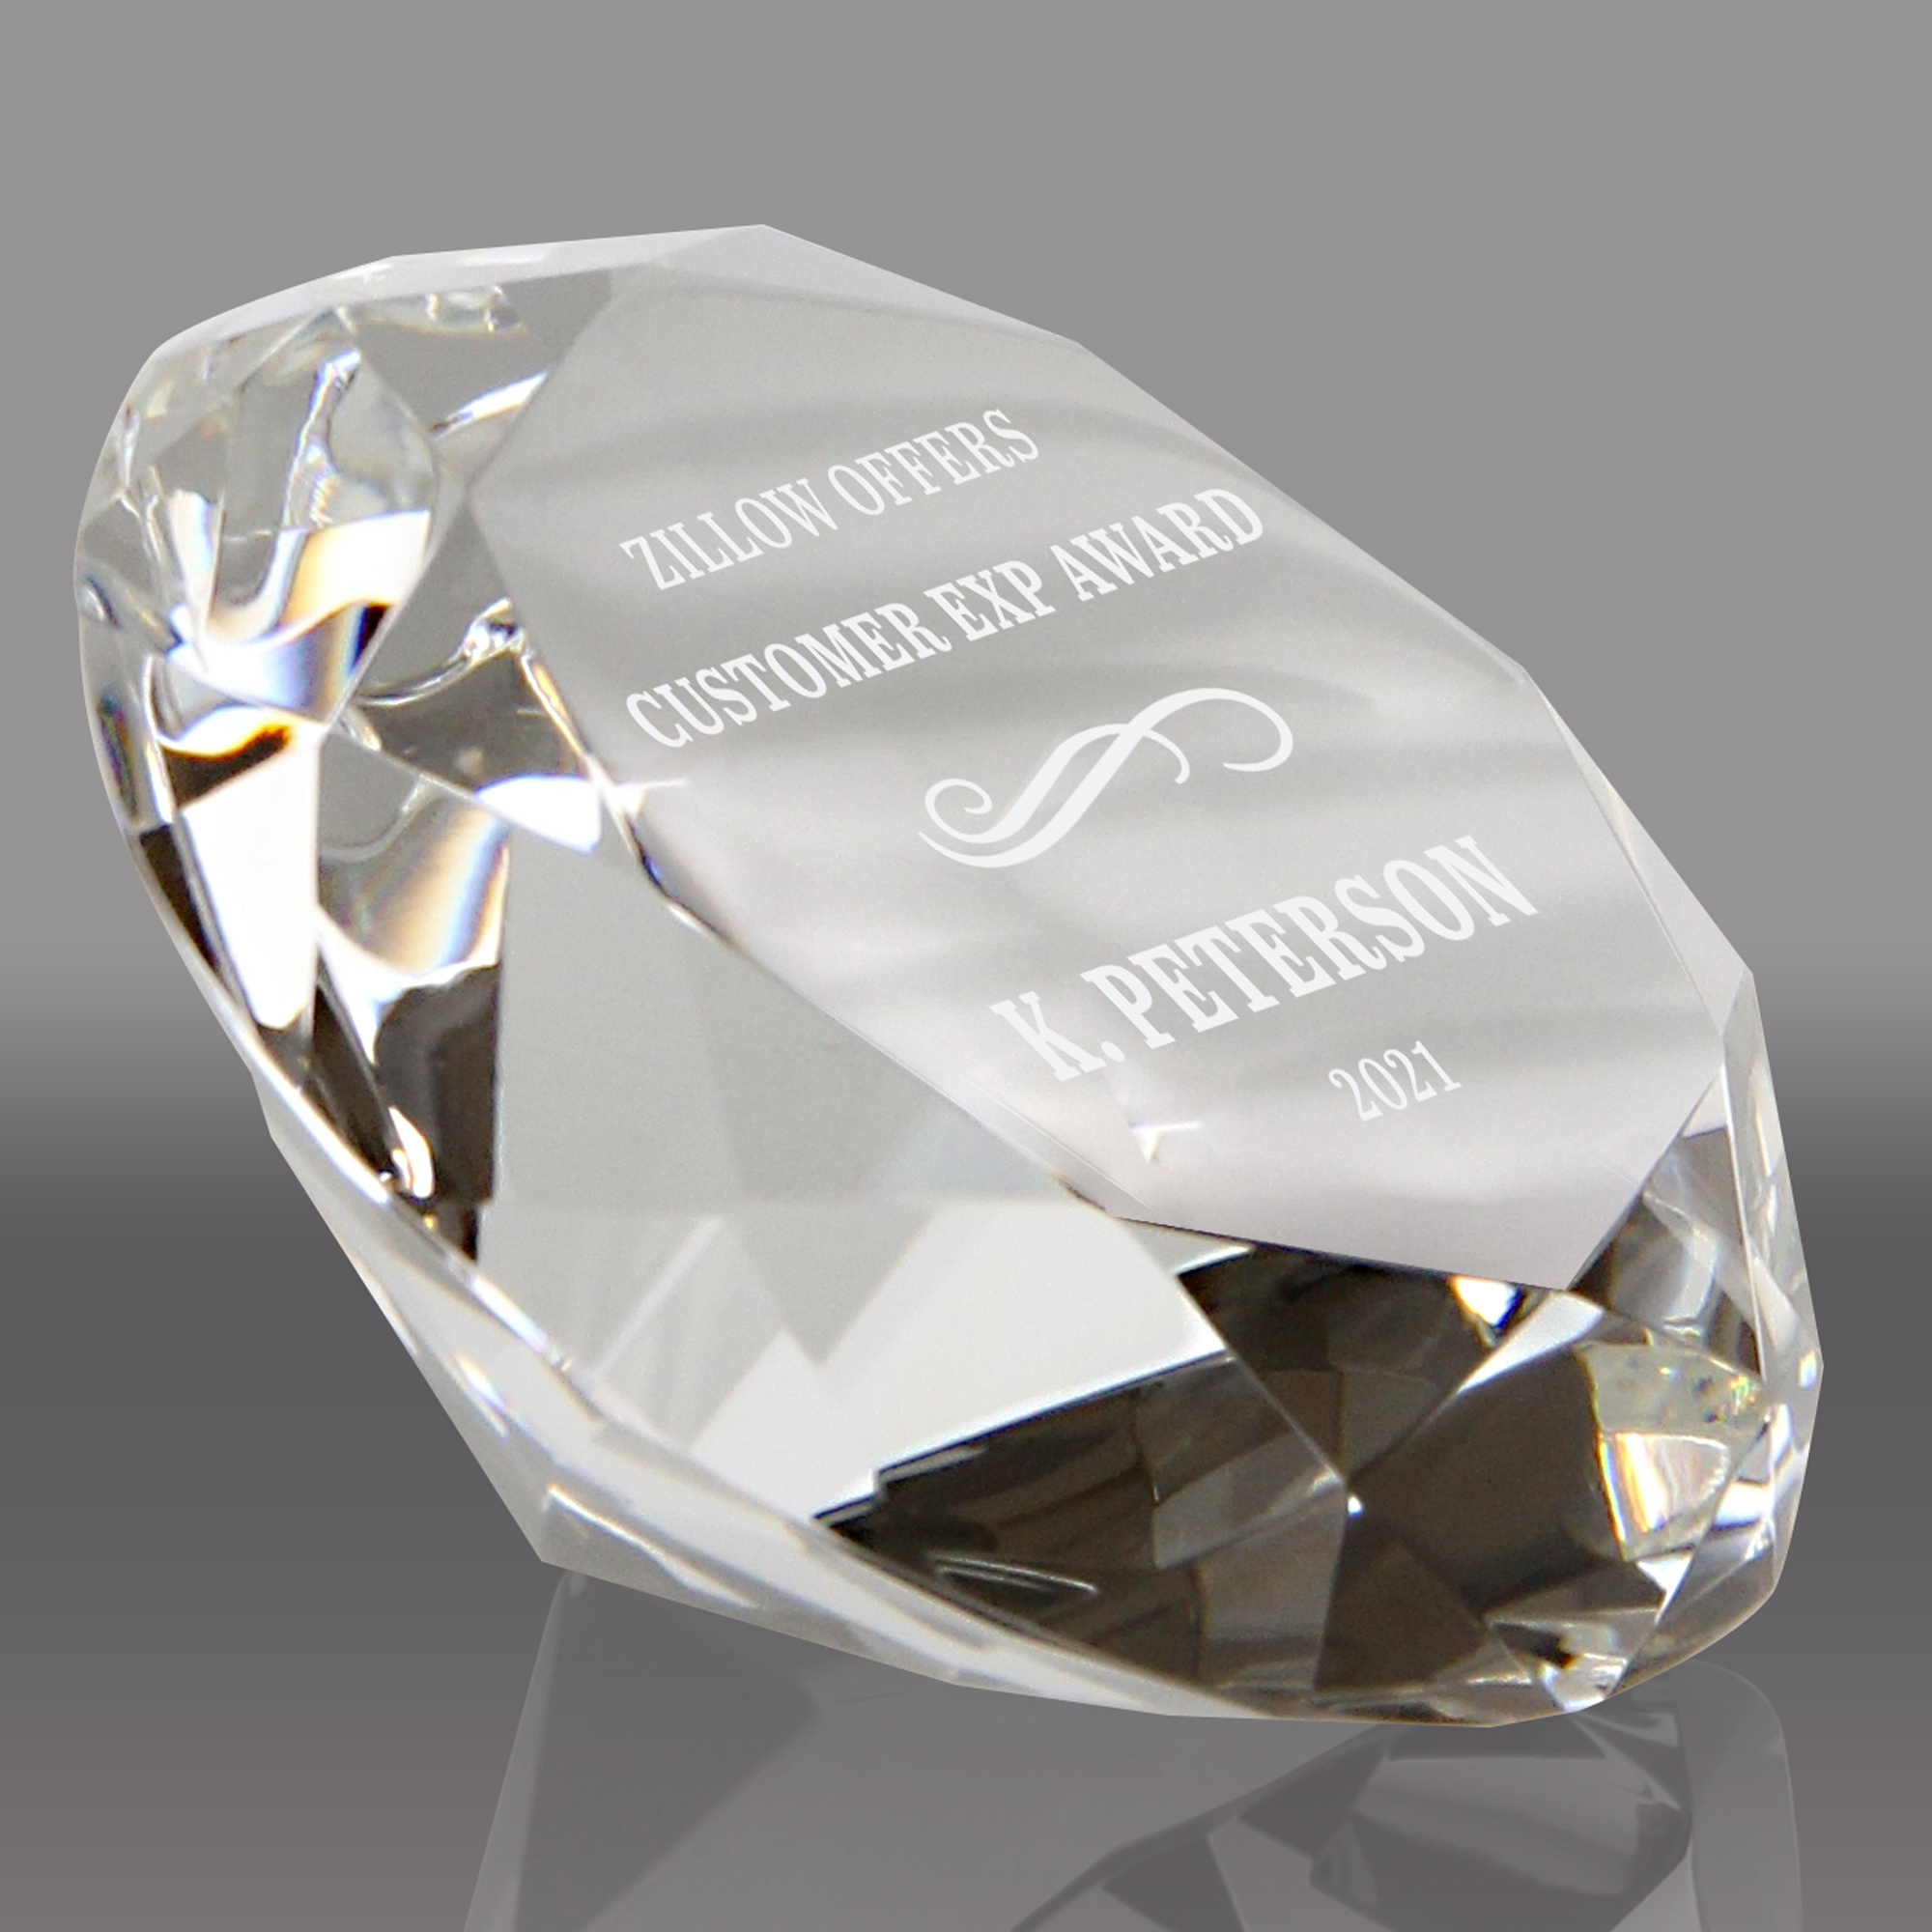 Clear Crystal Diamond Paperweight - 3.15 inch